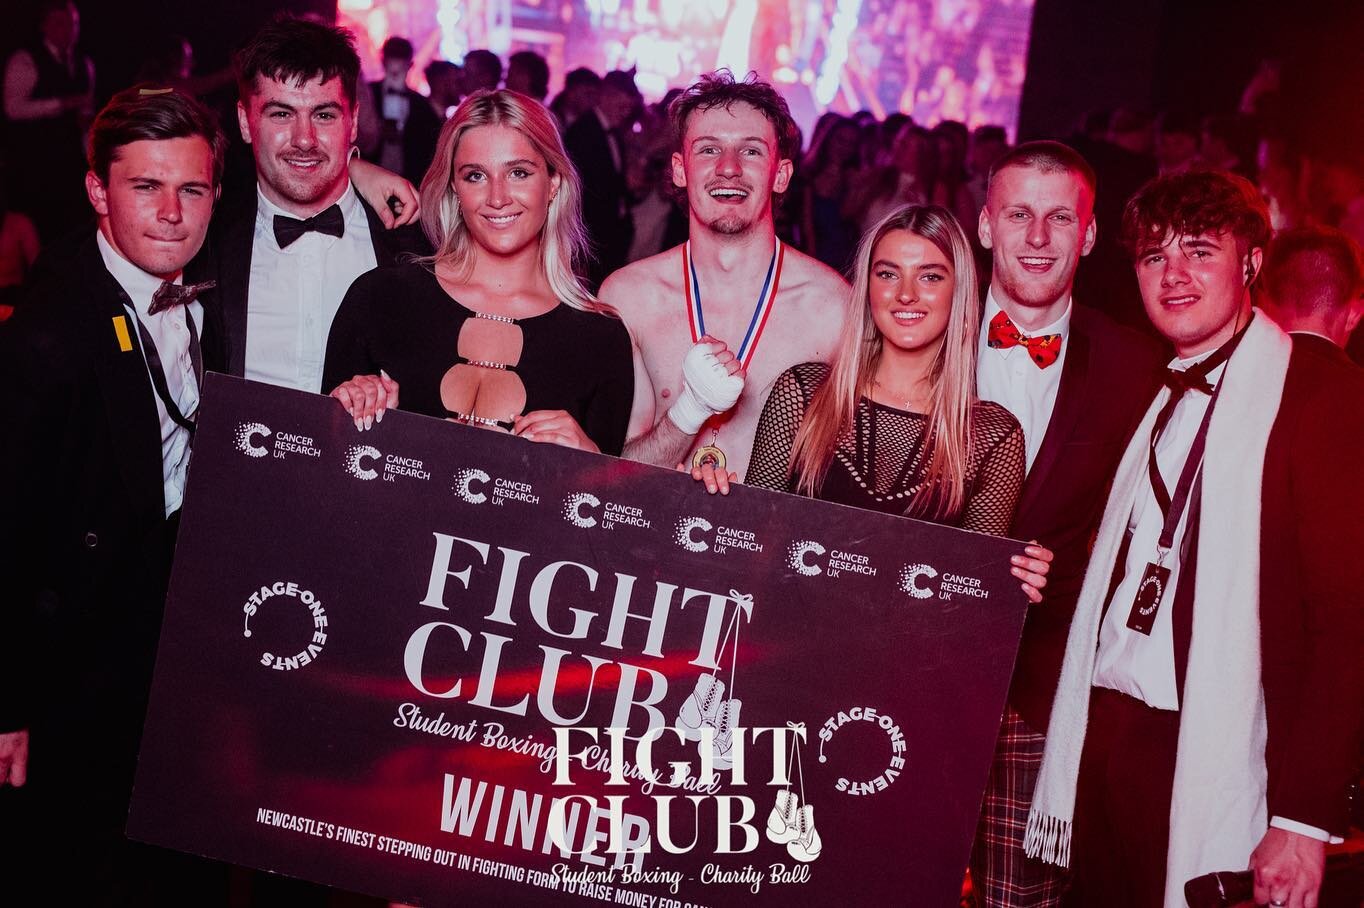 SIGNUP TO FIGHT THIS AUTUMN! &hellip;Hit up the link in our bio now! 🥊👑 Check out some of our favourite 📸 before the full albums drop on Sunday 19th June from our Back2Back Sold Out Rumbles on May 3rd and May 5th!

Spread the word and be sure to l